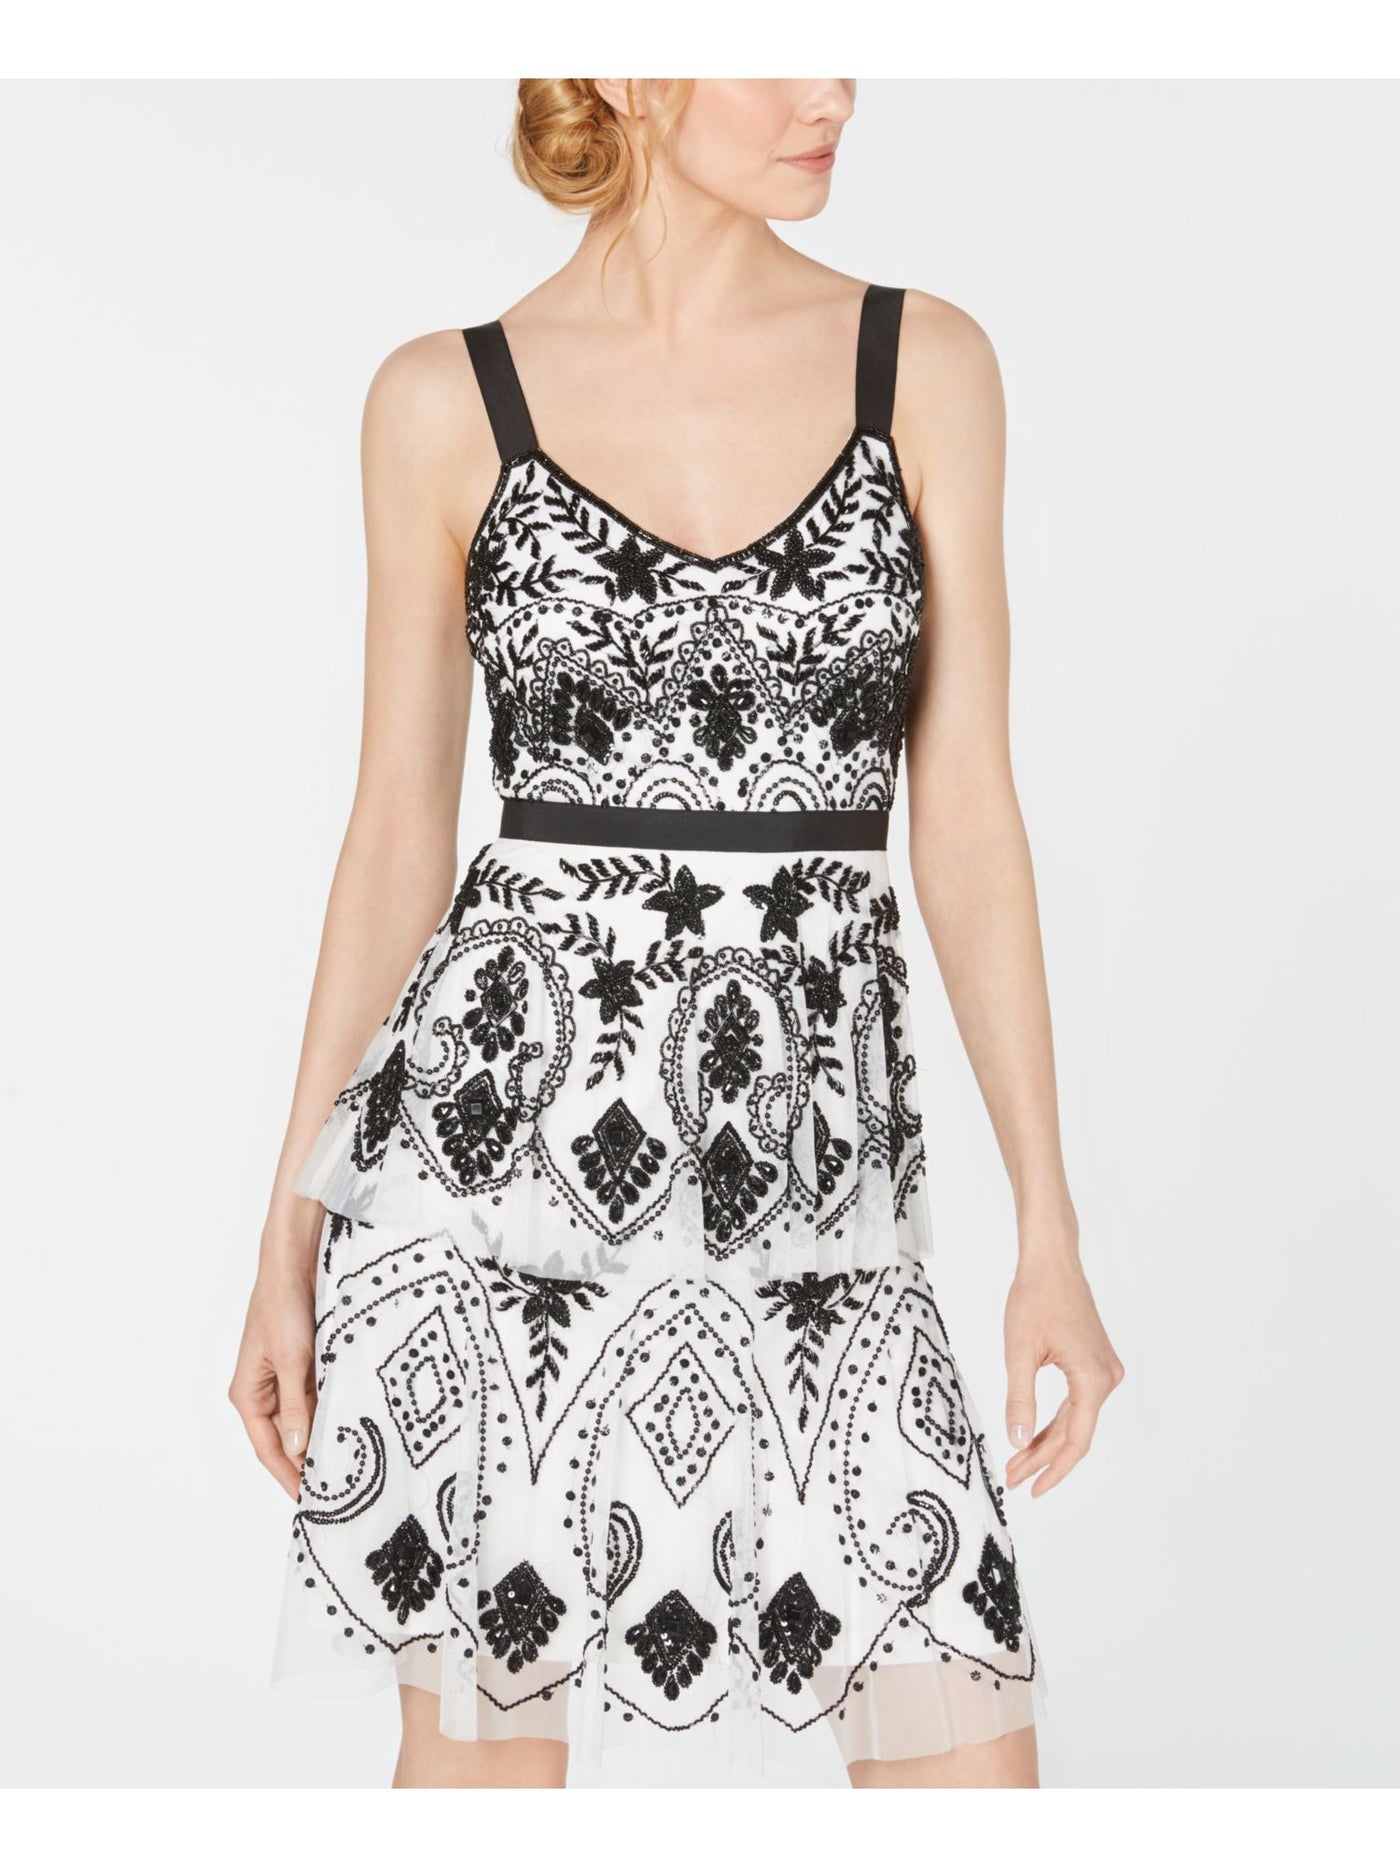 ADRIANNA PAPELL Womens Beaded Sleeveless Scoop Neck Above The Knee Cocktail A-Line Dress